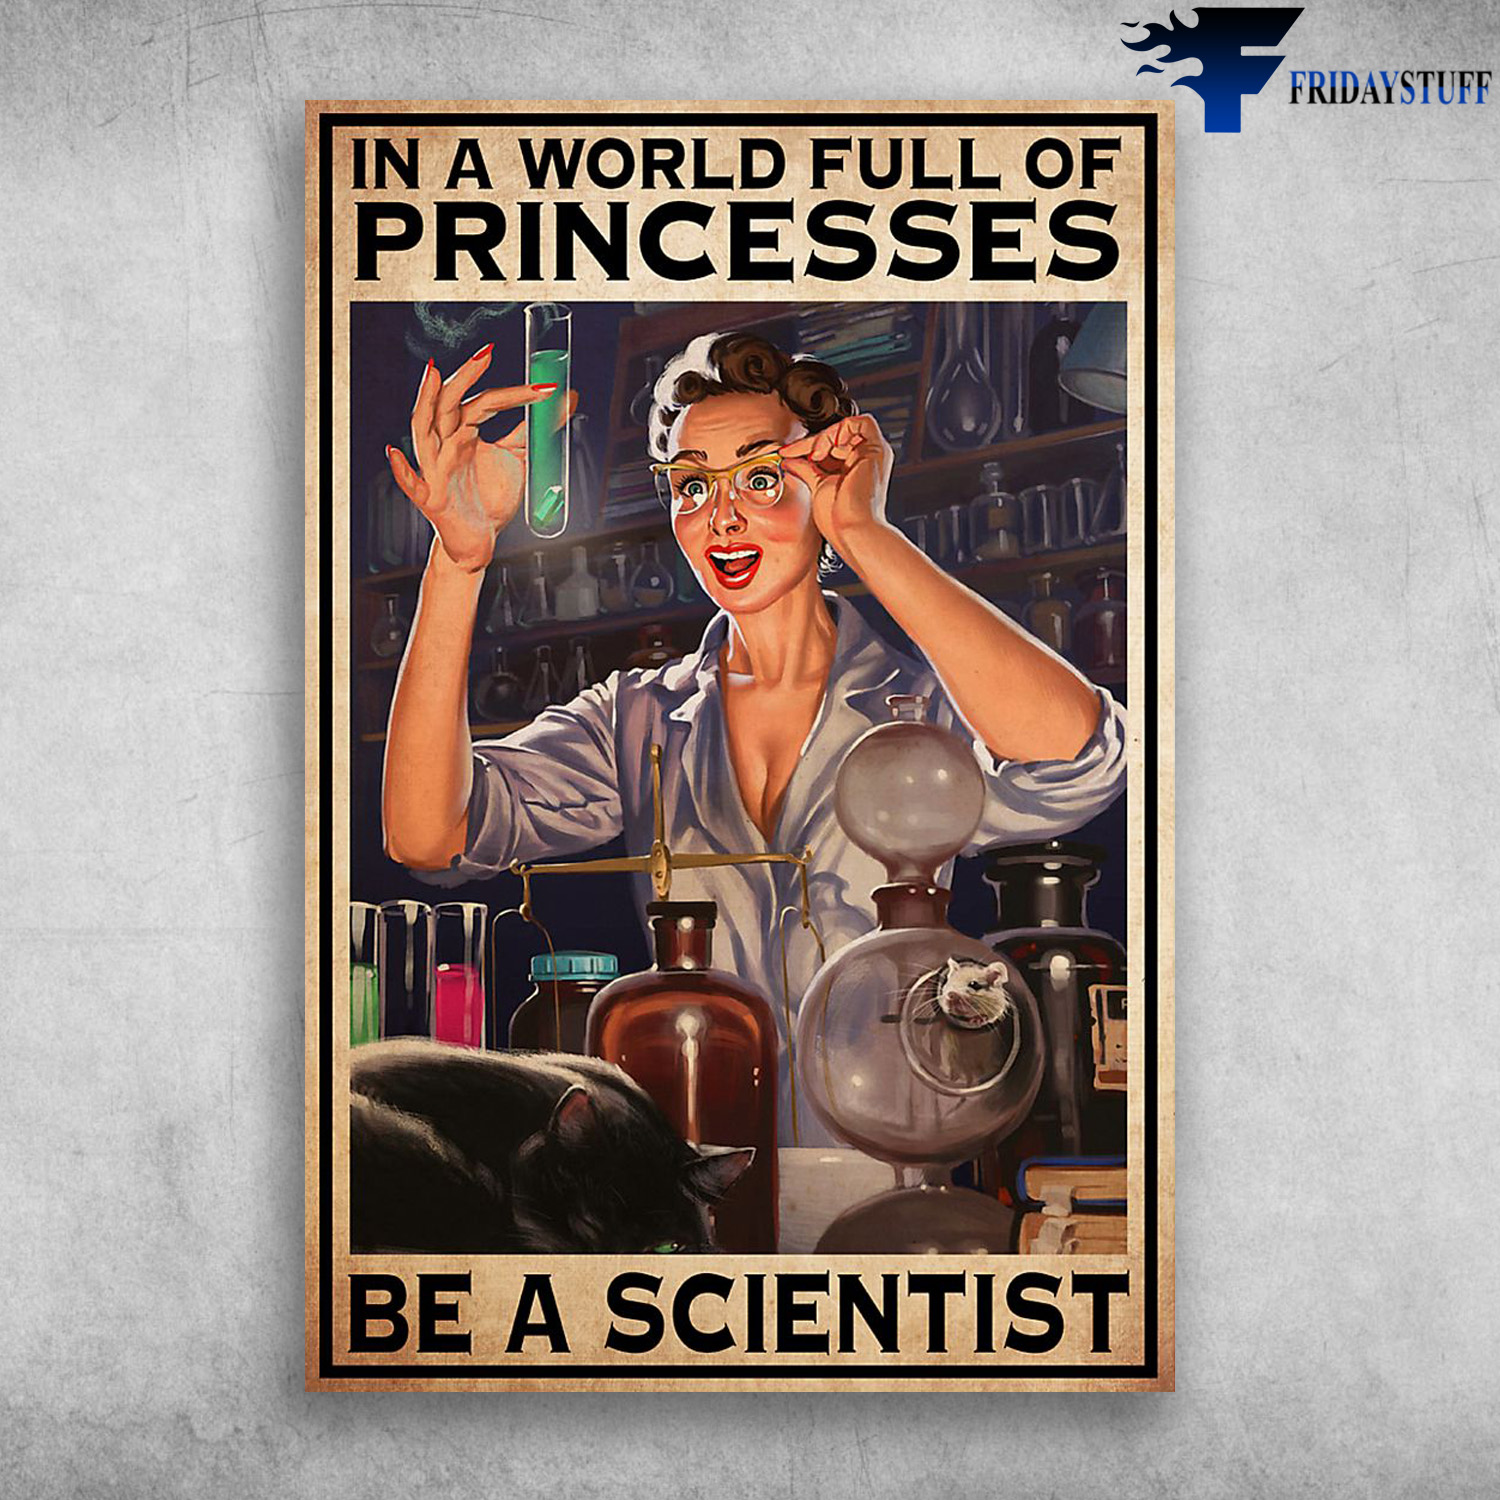 The Scientist - In A Worl, Full Of Princesses, Be A Scientist